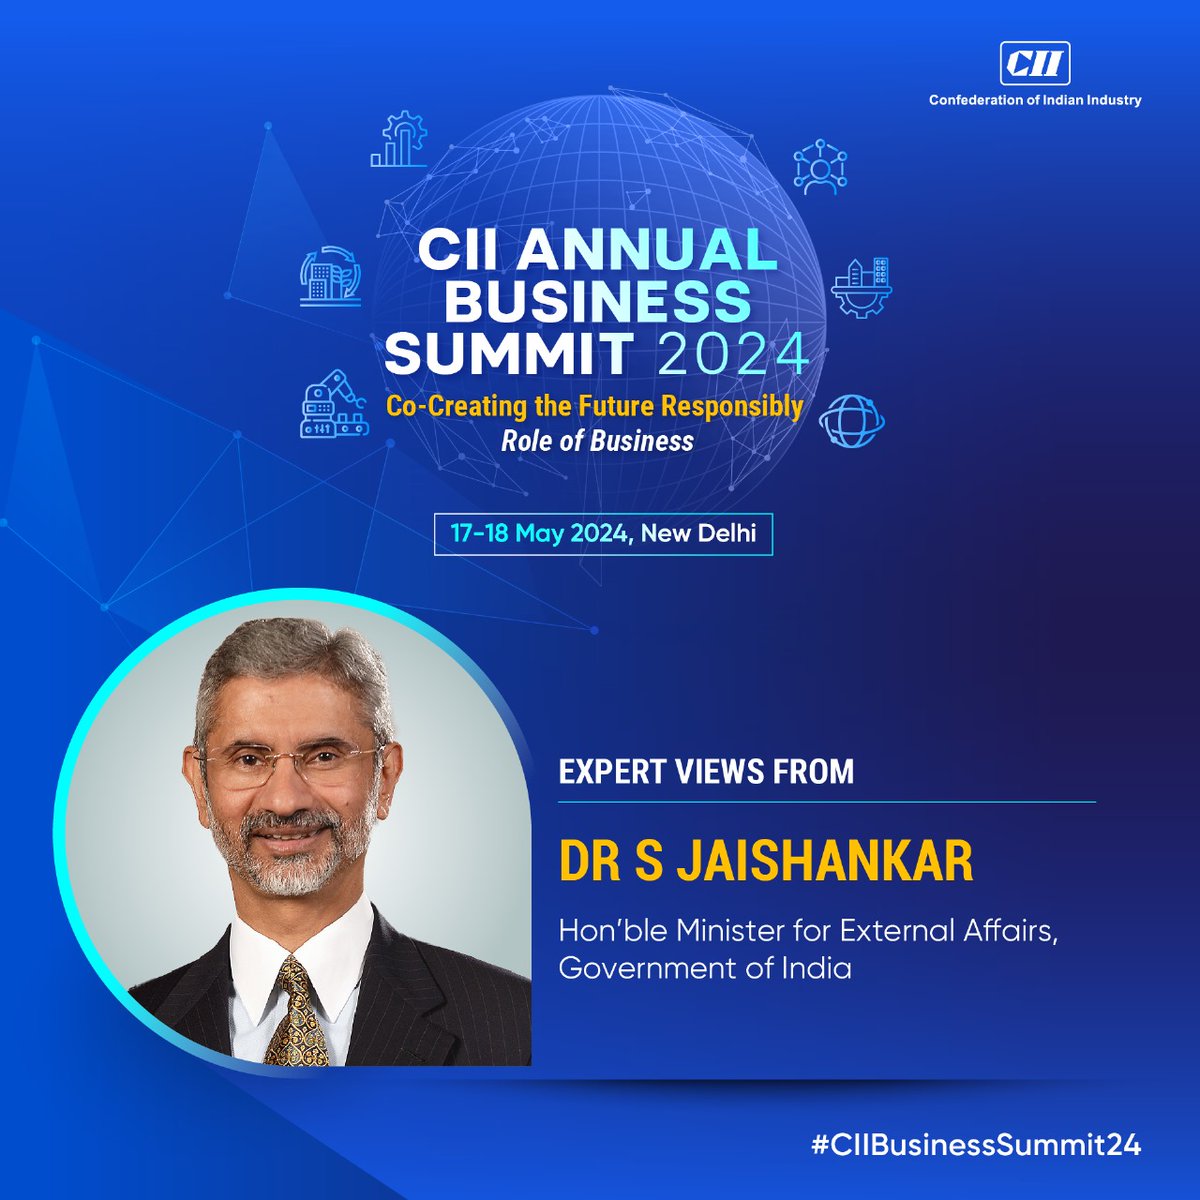 .@DrSJaishankar, Hon'ble Minister of External Affairs, Government of India will share valuable thoughts and insights during the Special Plenary session at the CII Annual Business Summit 2024! Gather deep insights on way ahead for the Indian economy. Block your calendar ➡17-18